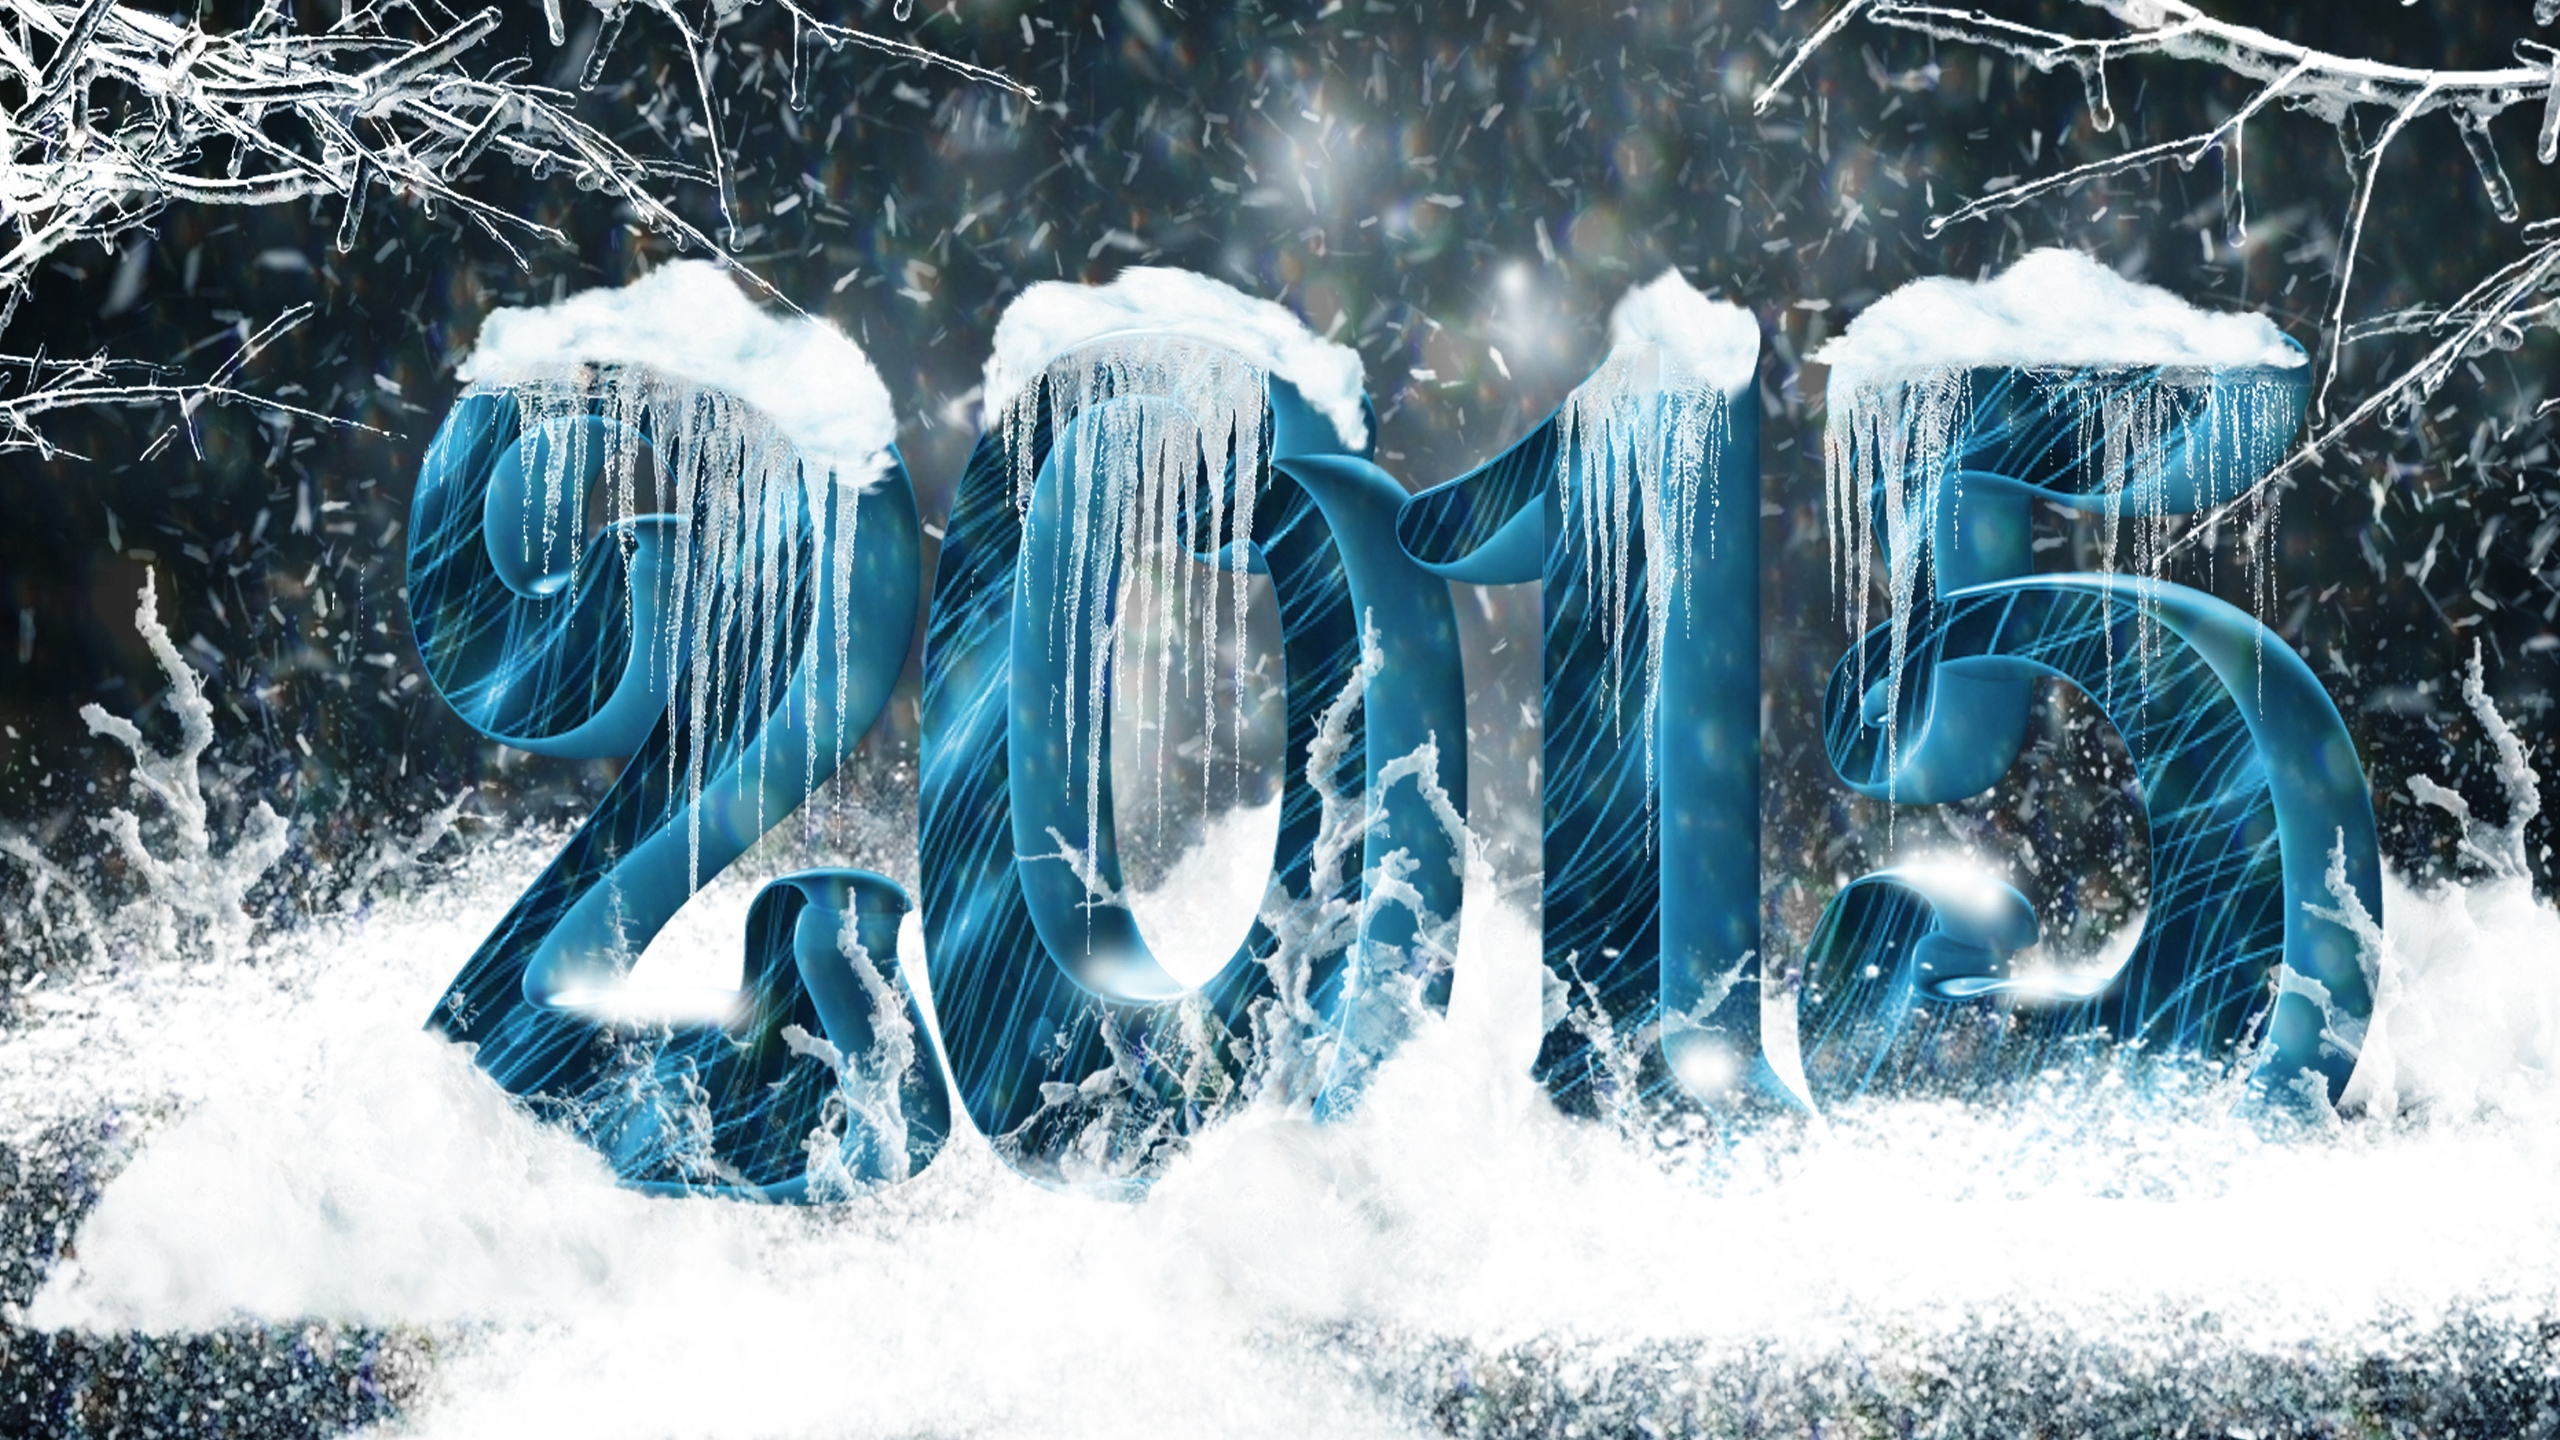 2015 Frozen Numbers for 2560x1440 HDTV resolution